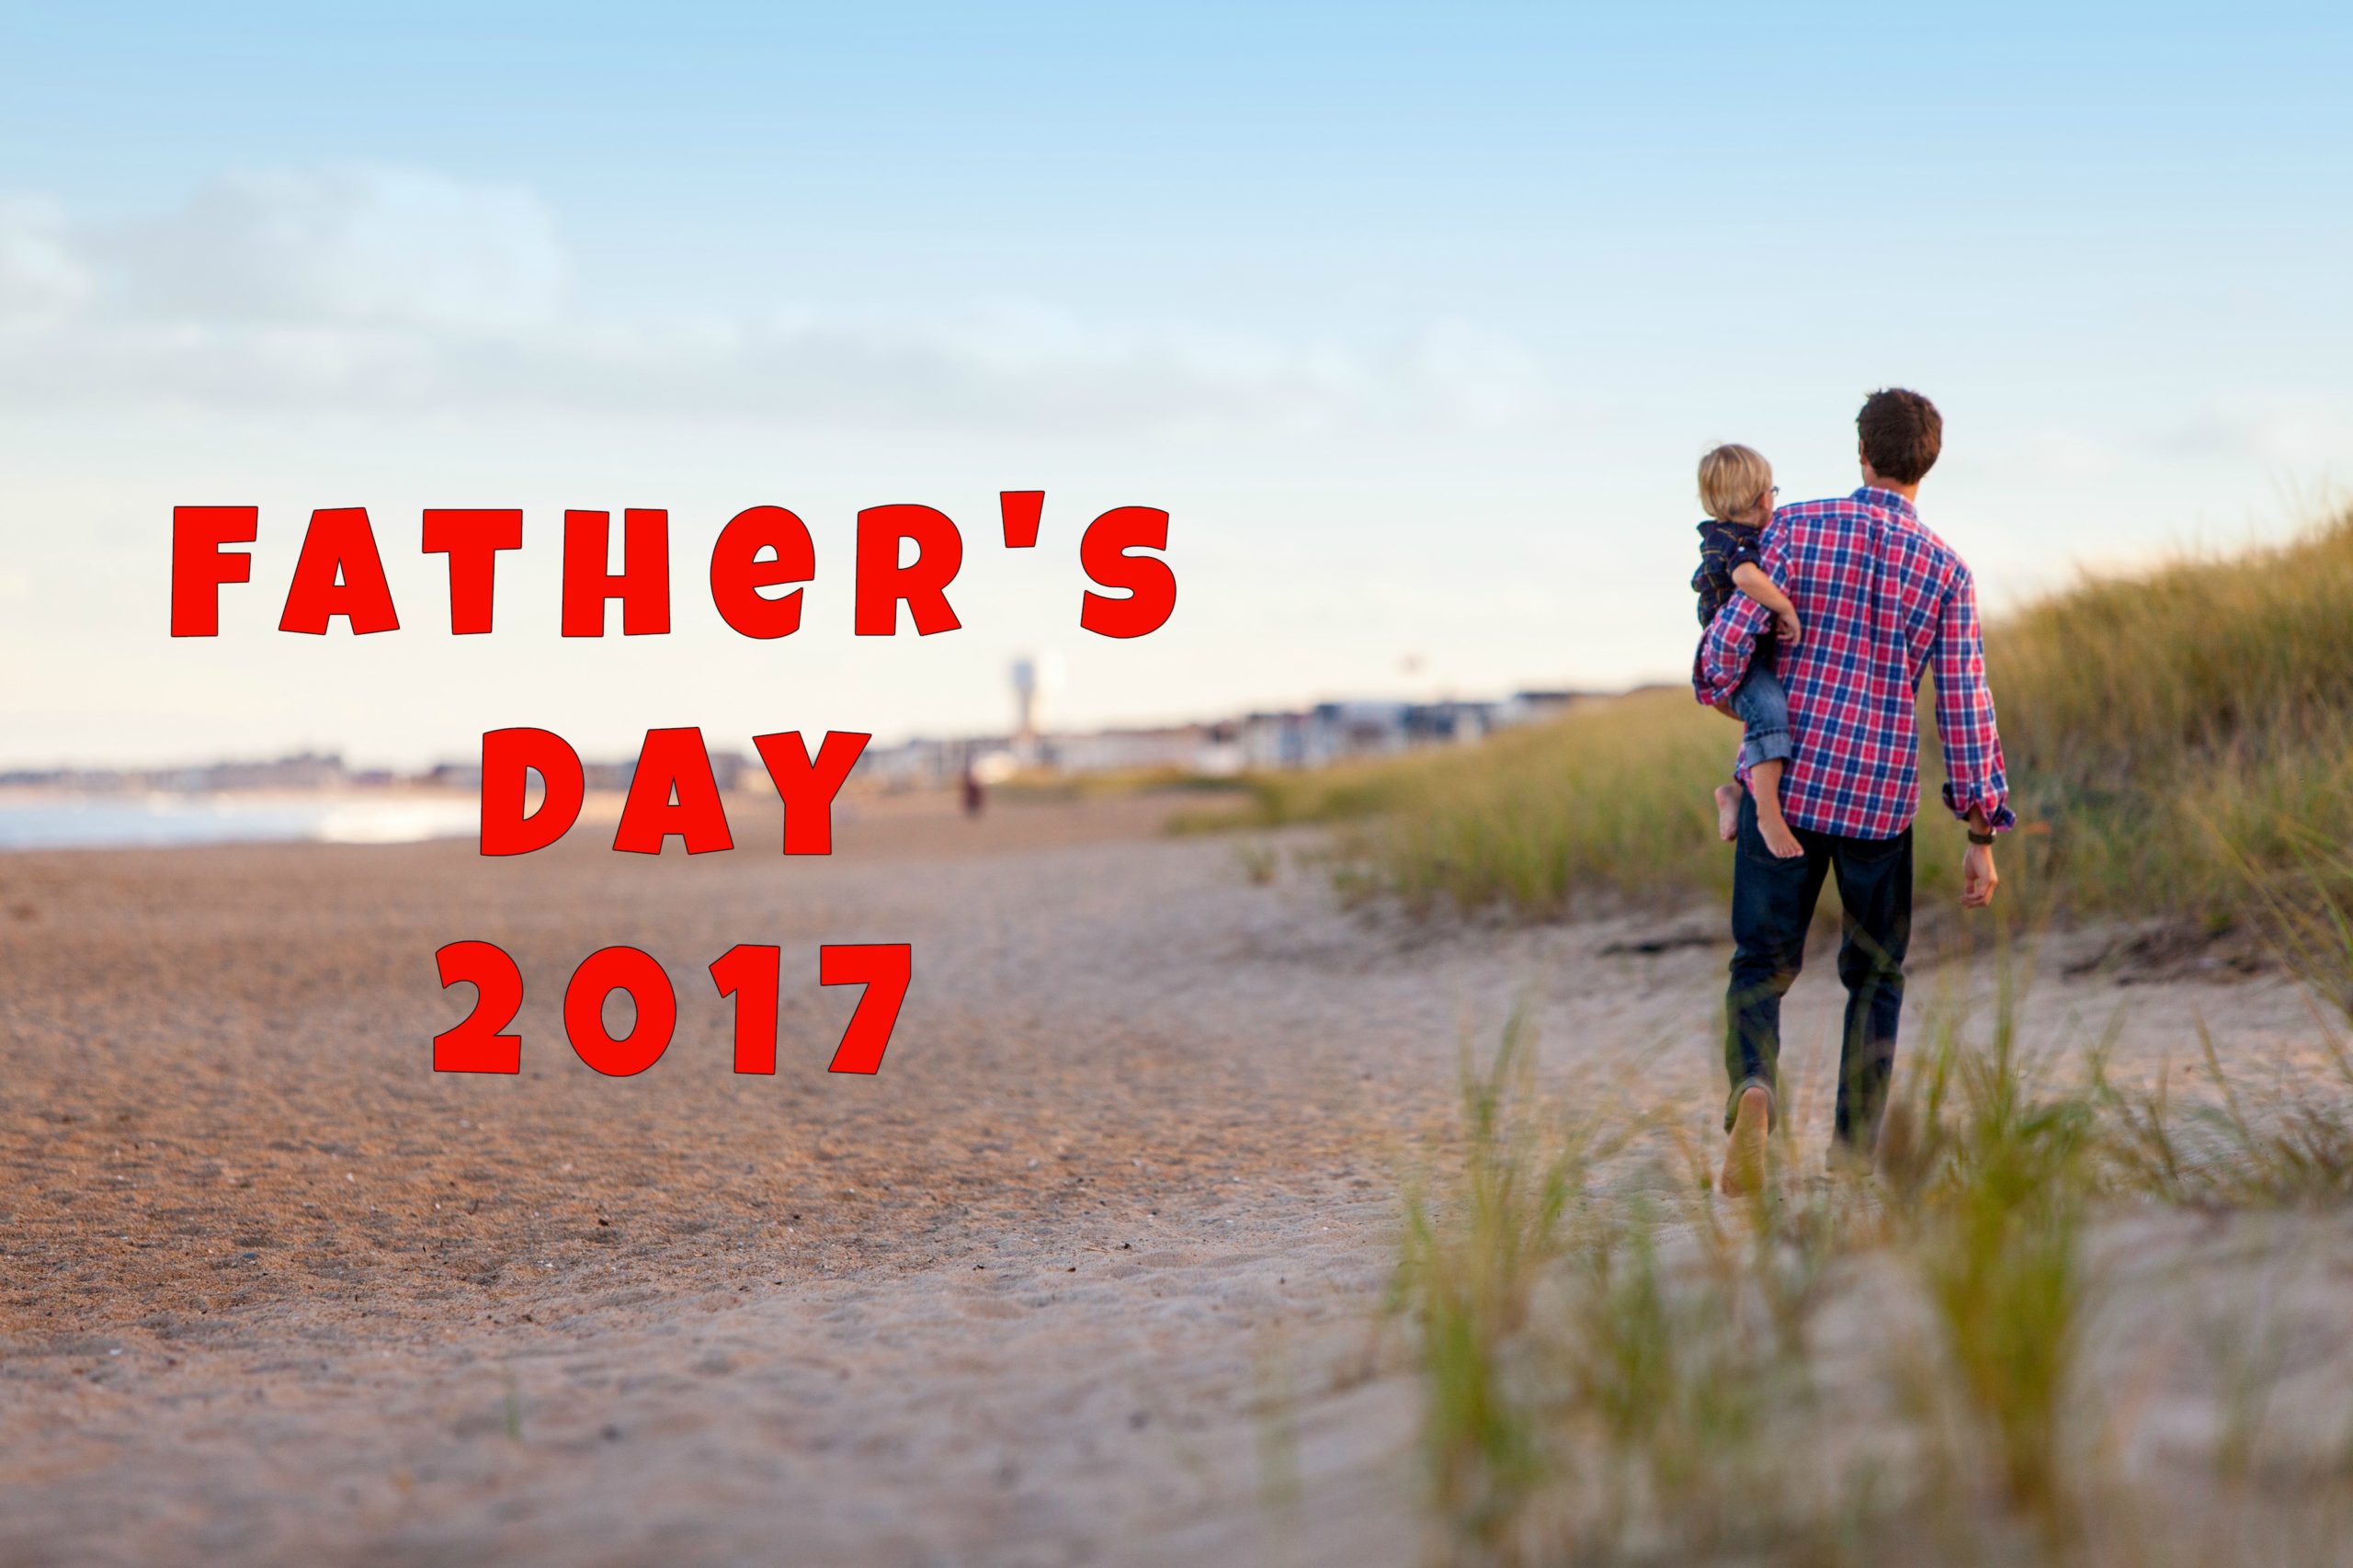 Father’s Day Shopping Guide, where are the Best Deals Online?